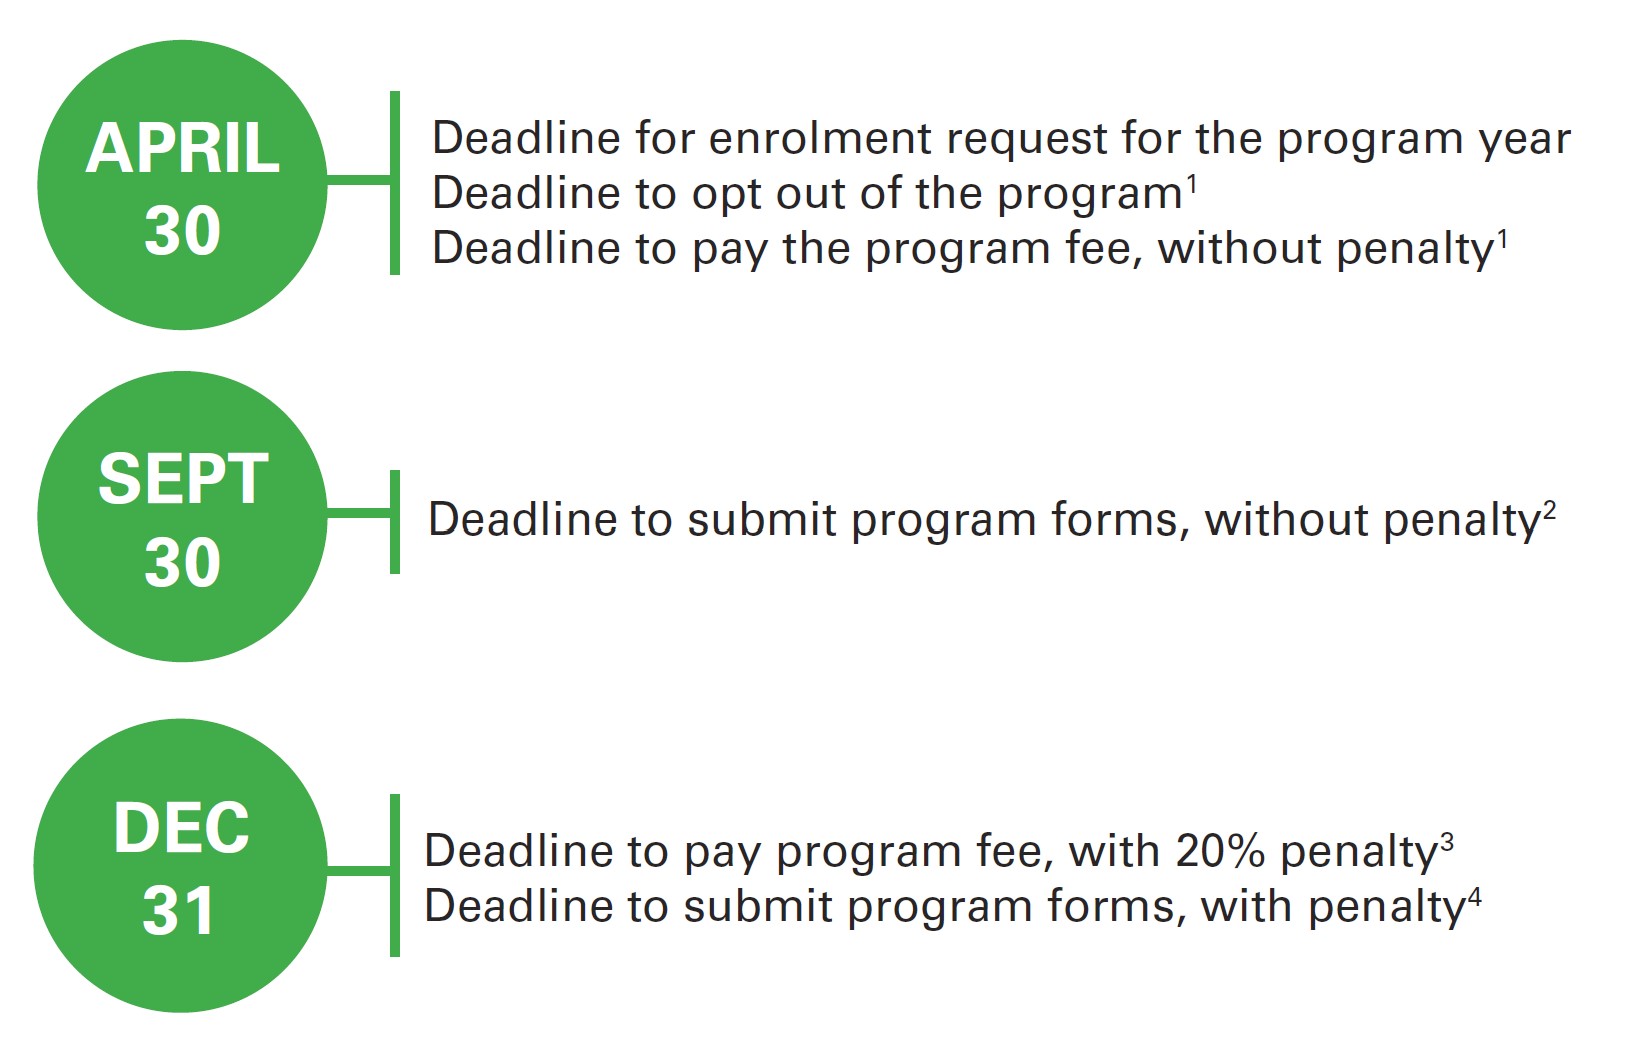 Deadlines April 30- Deadline for enrolment request for the program year; Deadline to opt out of the program (Note 1); Deadline to pay the program fee, without penalty (Note 1) September 30 - Deadline to submit program forms, without penalty (Note 2) December 31 - Deadline to pay program fee, with 20% penalty (Note 3); Deadline to submit program forms, with penalty (Note 4)